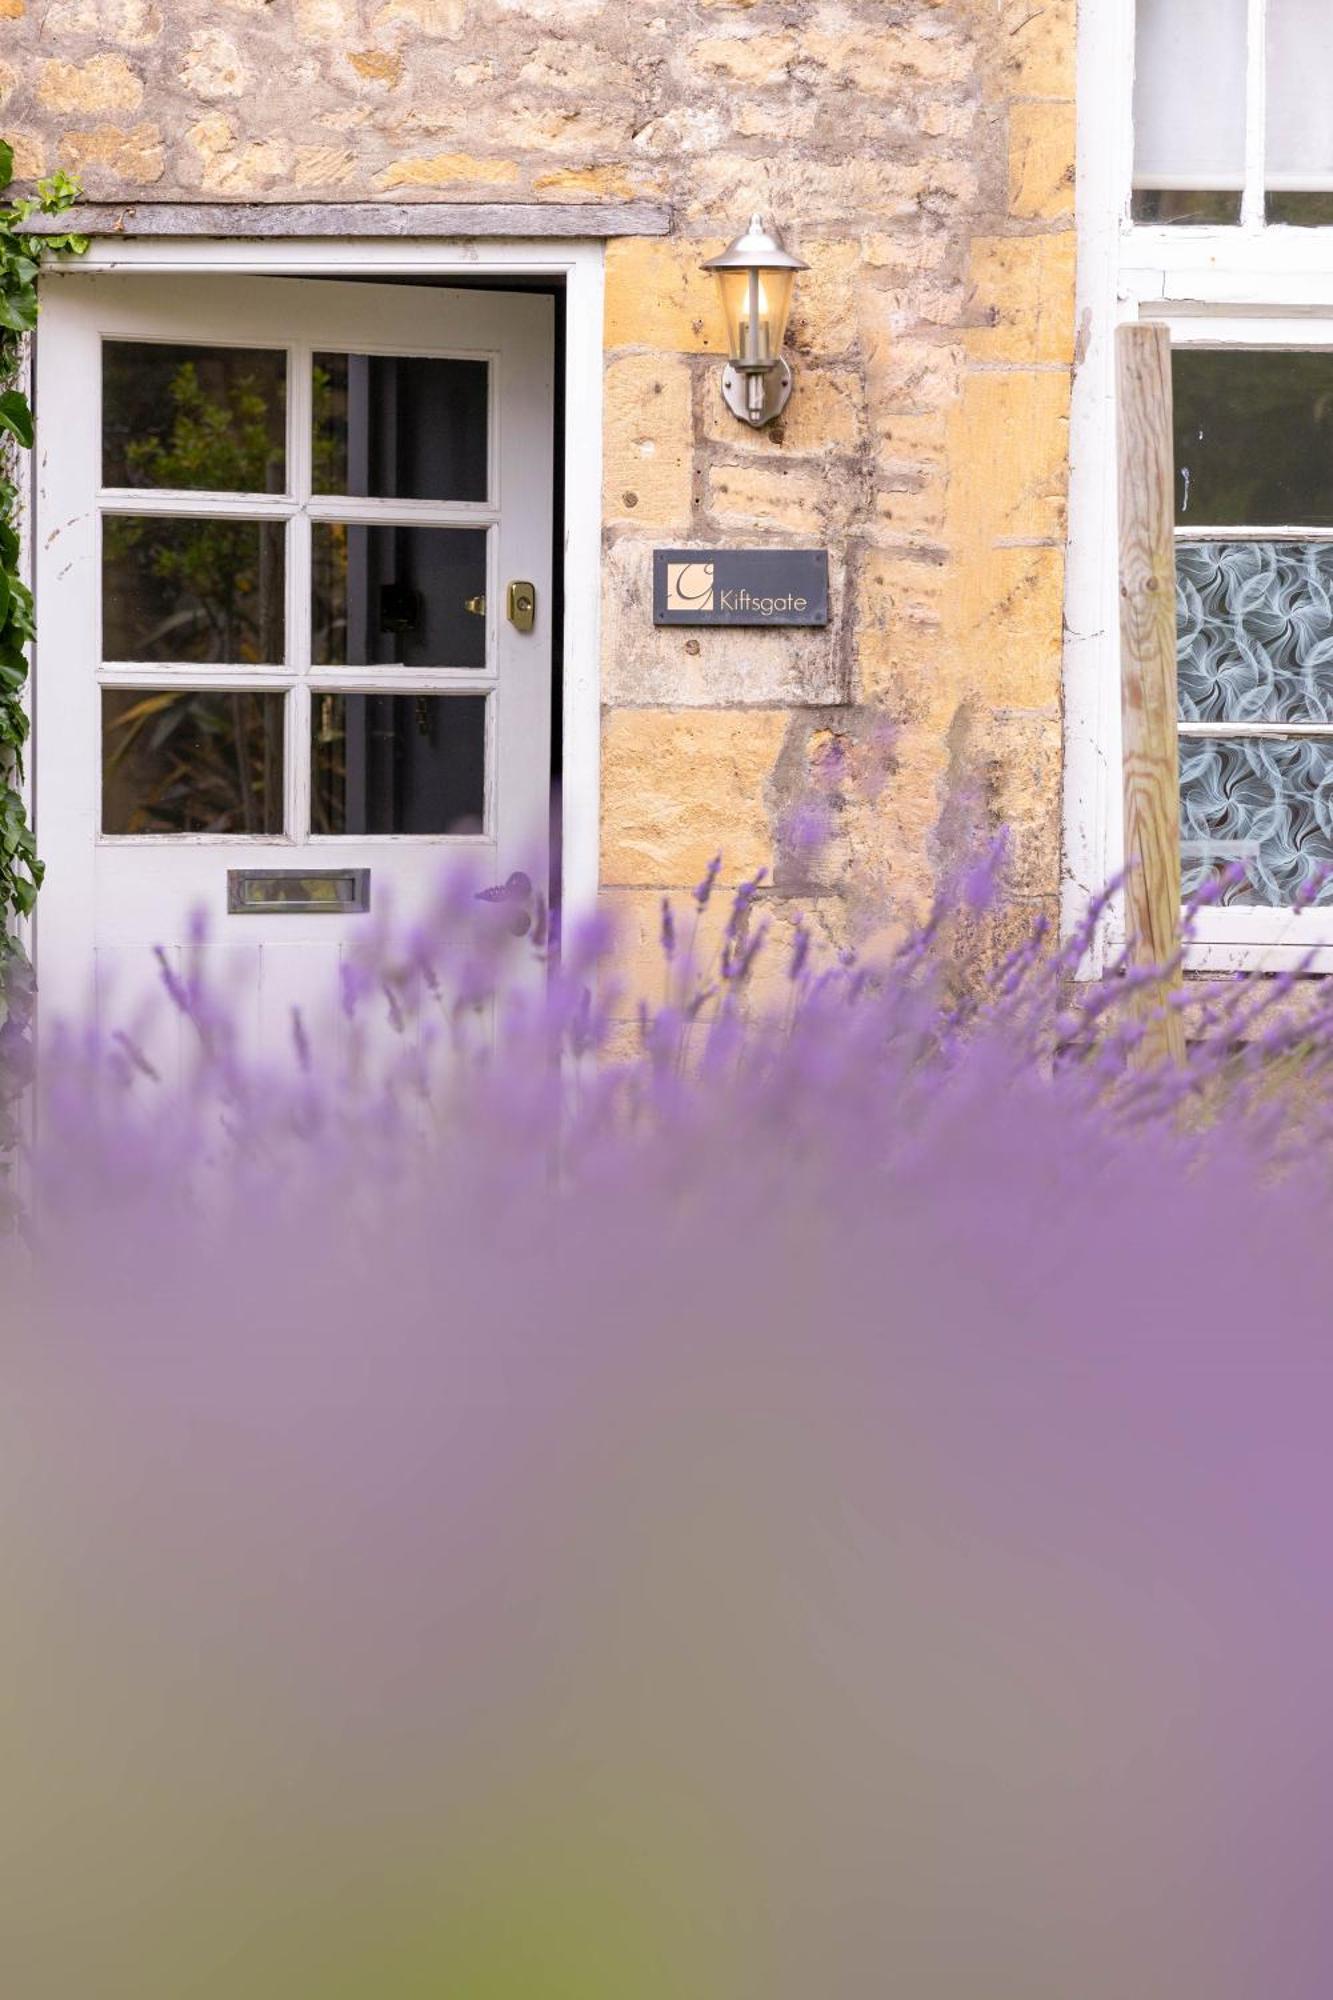 Cotswold House Hotel And Spa - "A Bespoke Hotel" Chipping Campden Exterior photo